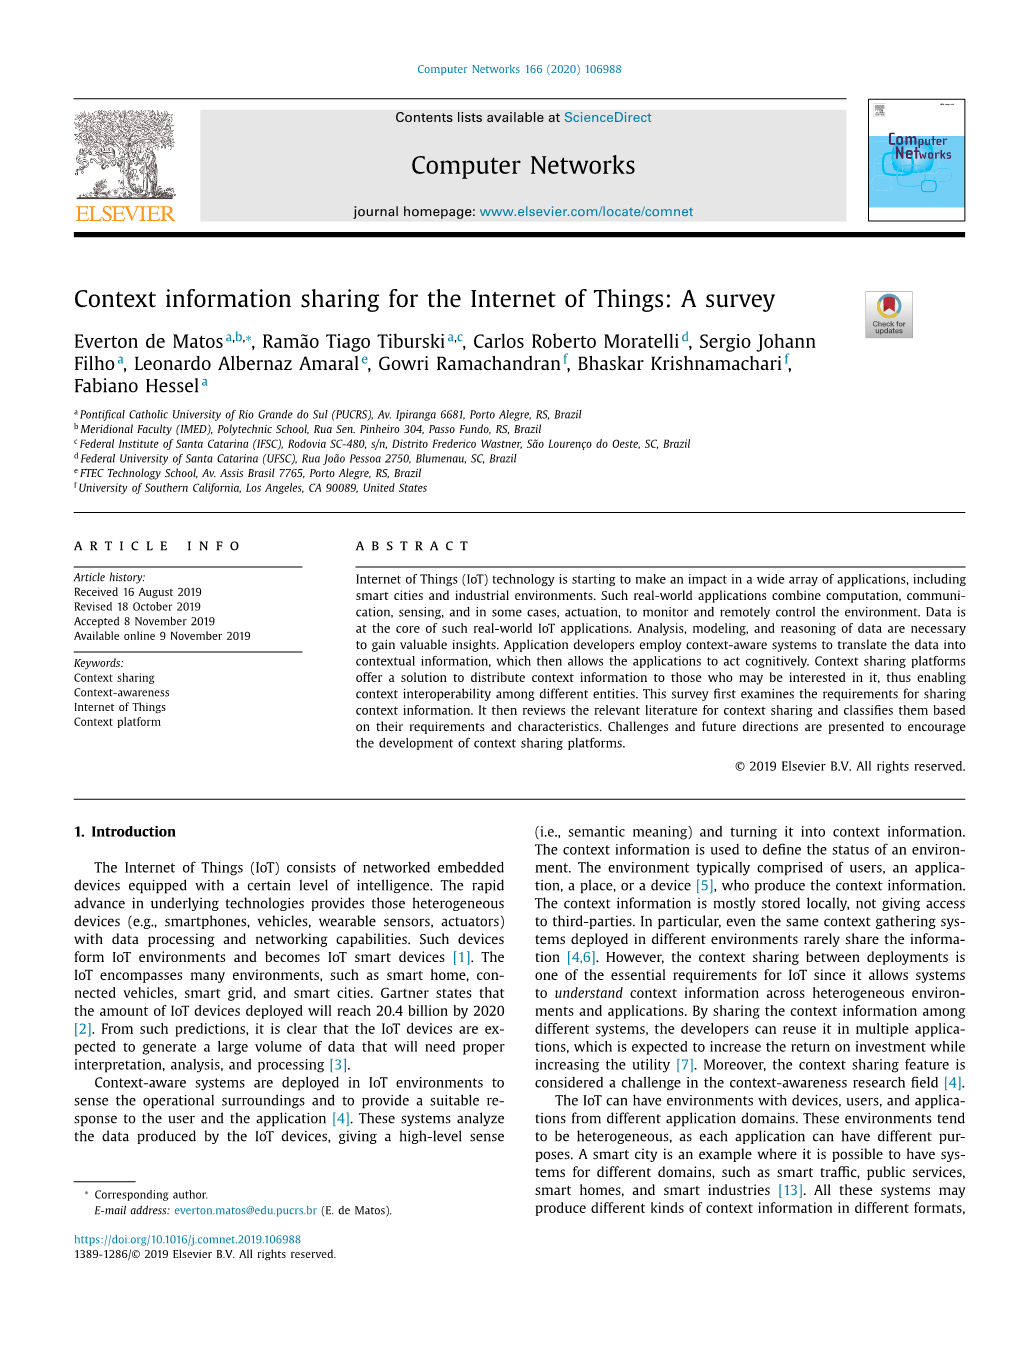 Context Information Sharing for the Internet of Things: a Survey